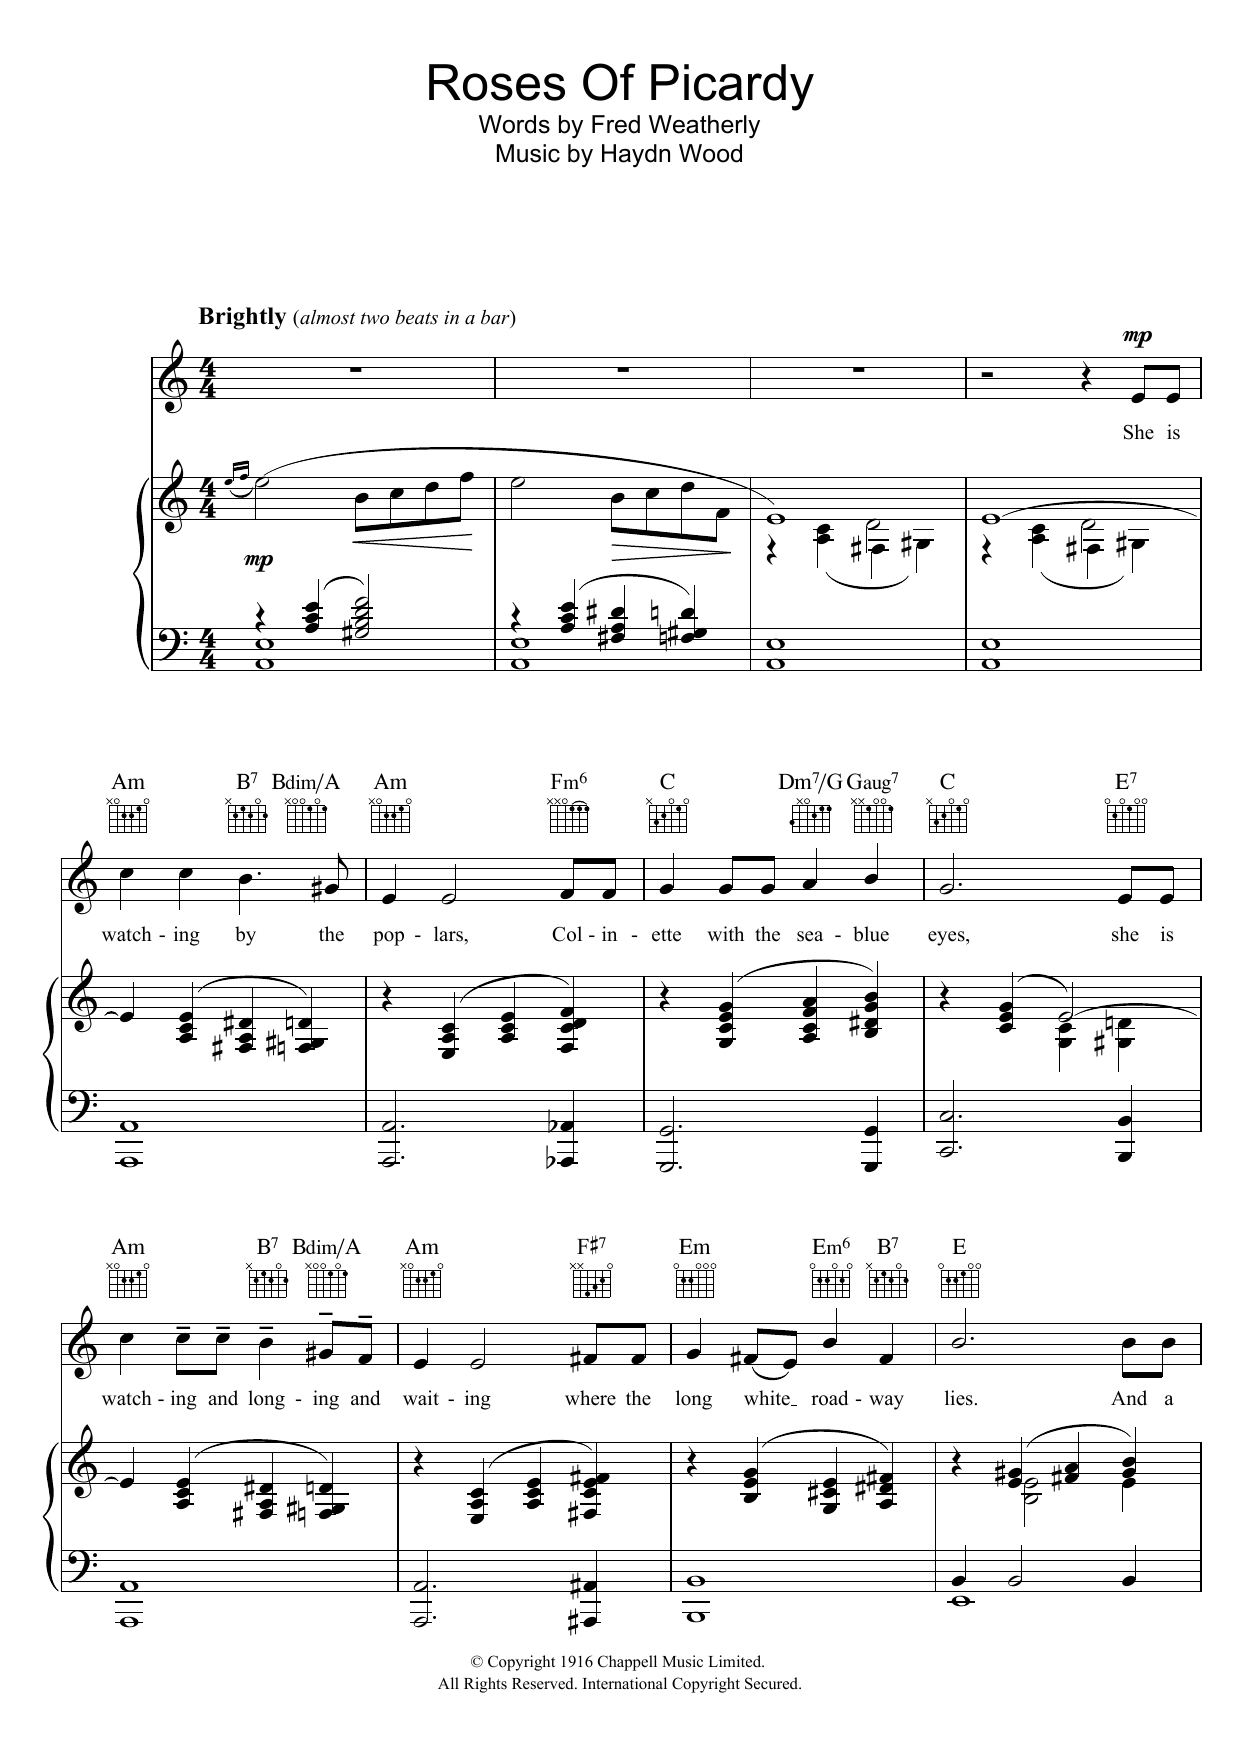 Download Haydn Wood Roses Of Picardy Sheet Music